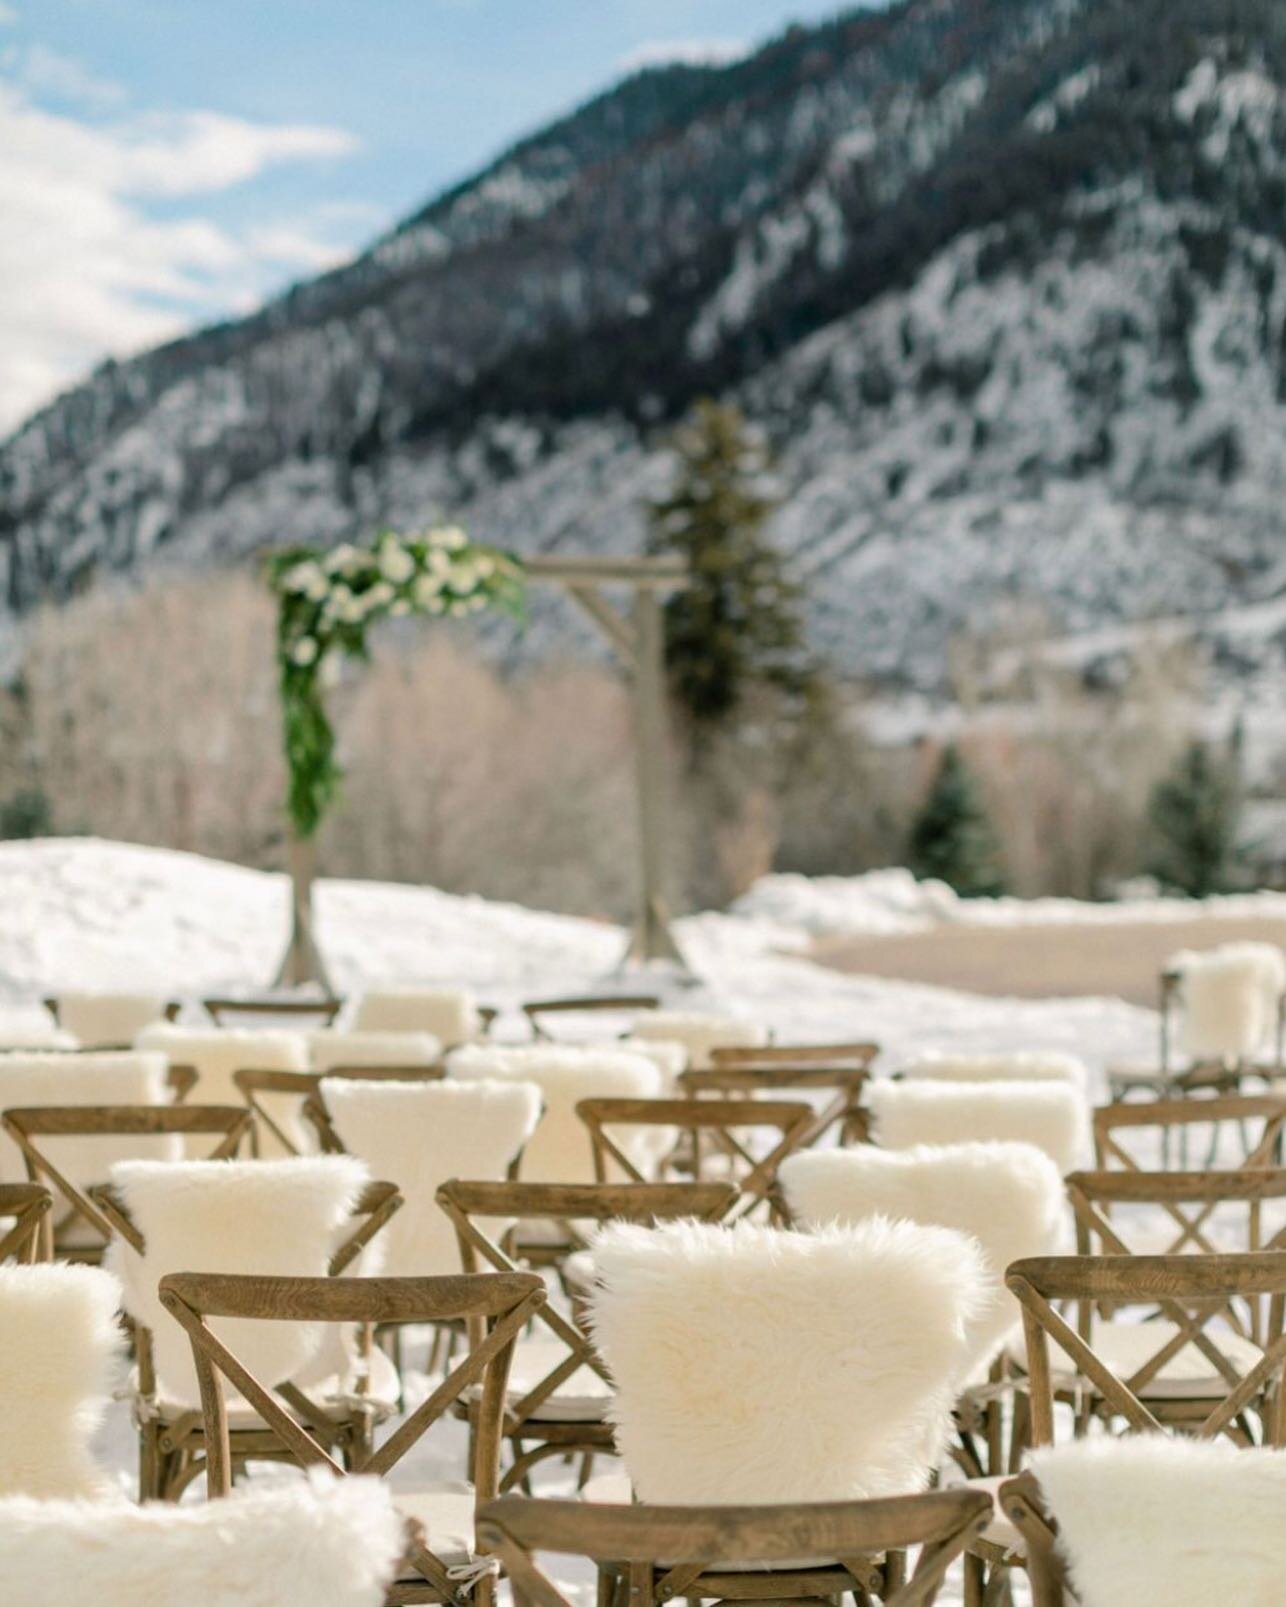 Transitioning into the holiday season has us thinking back on past December weddings - this snow covered mountain top ceremony was one for the books!